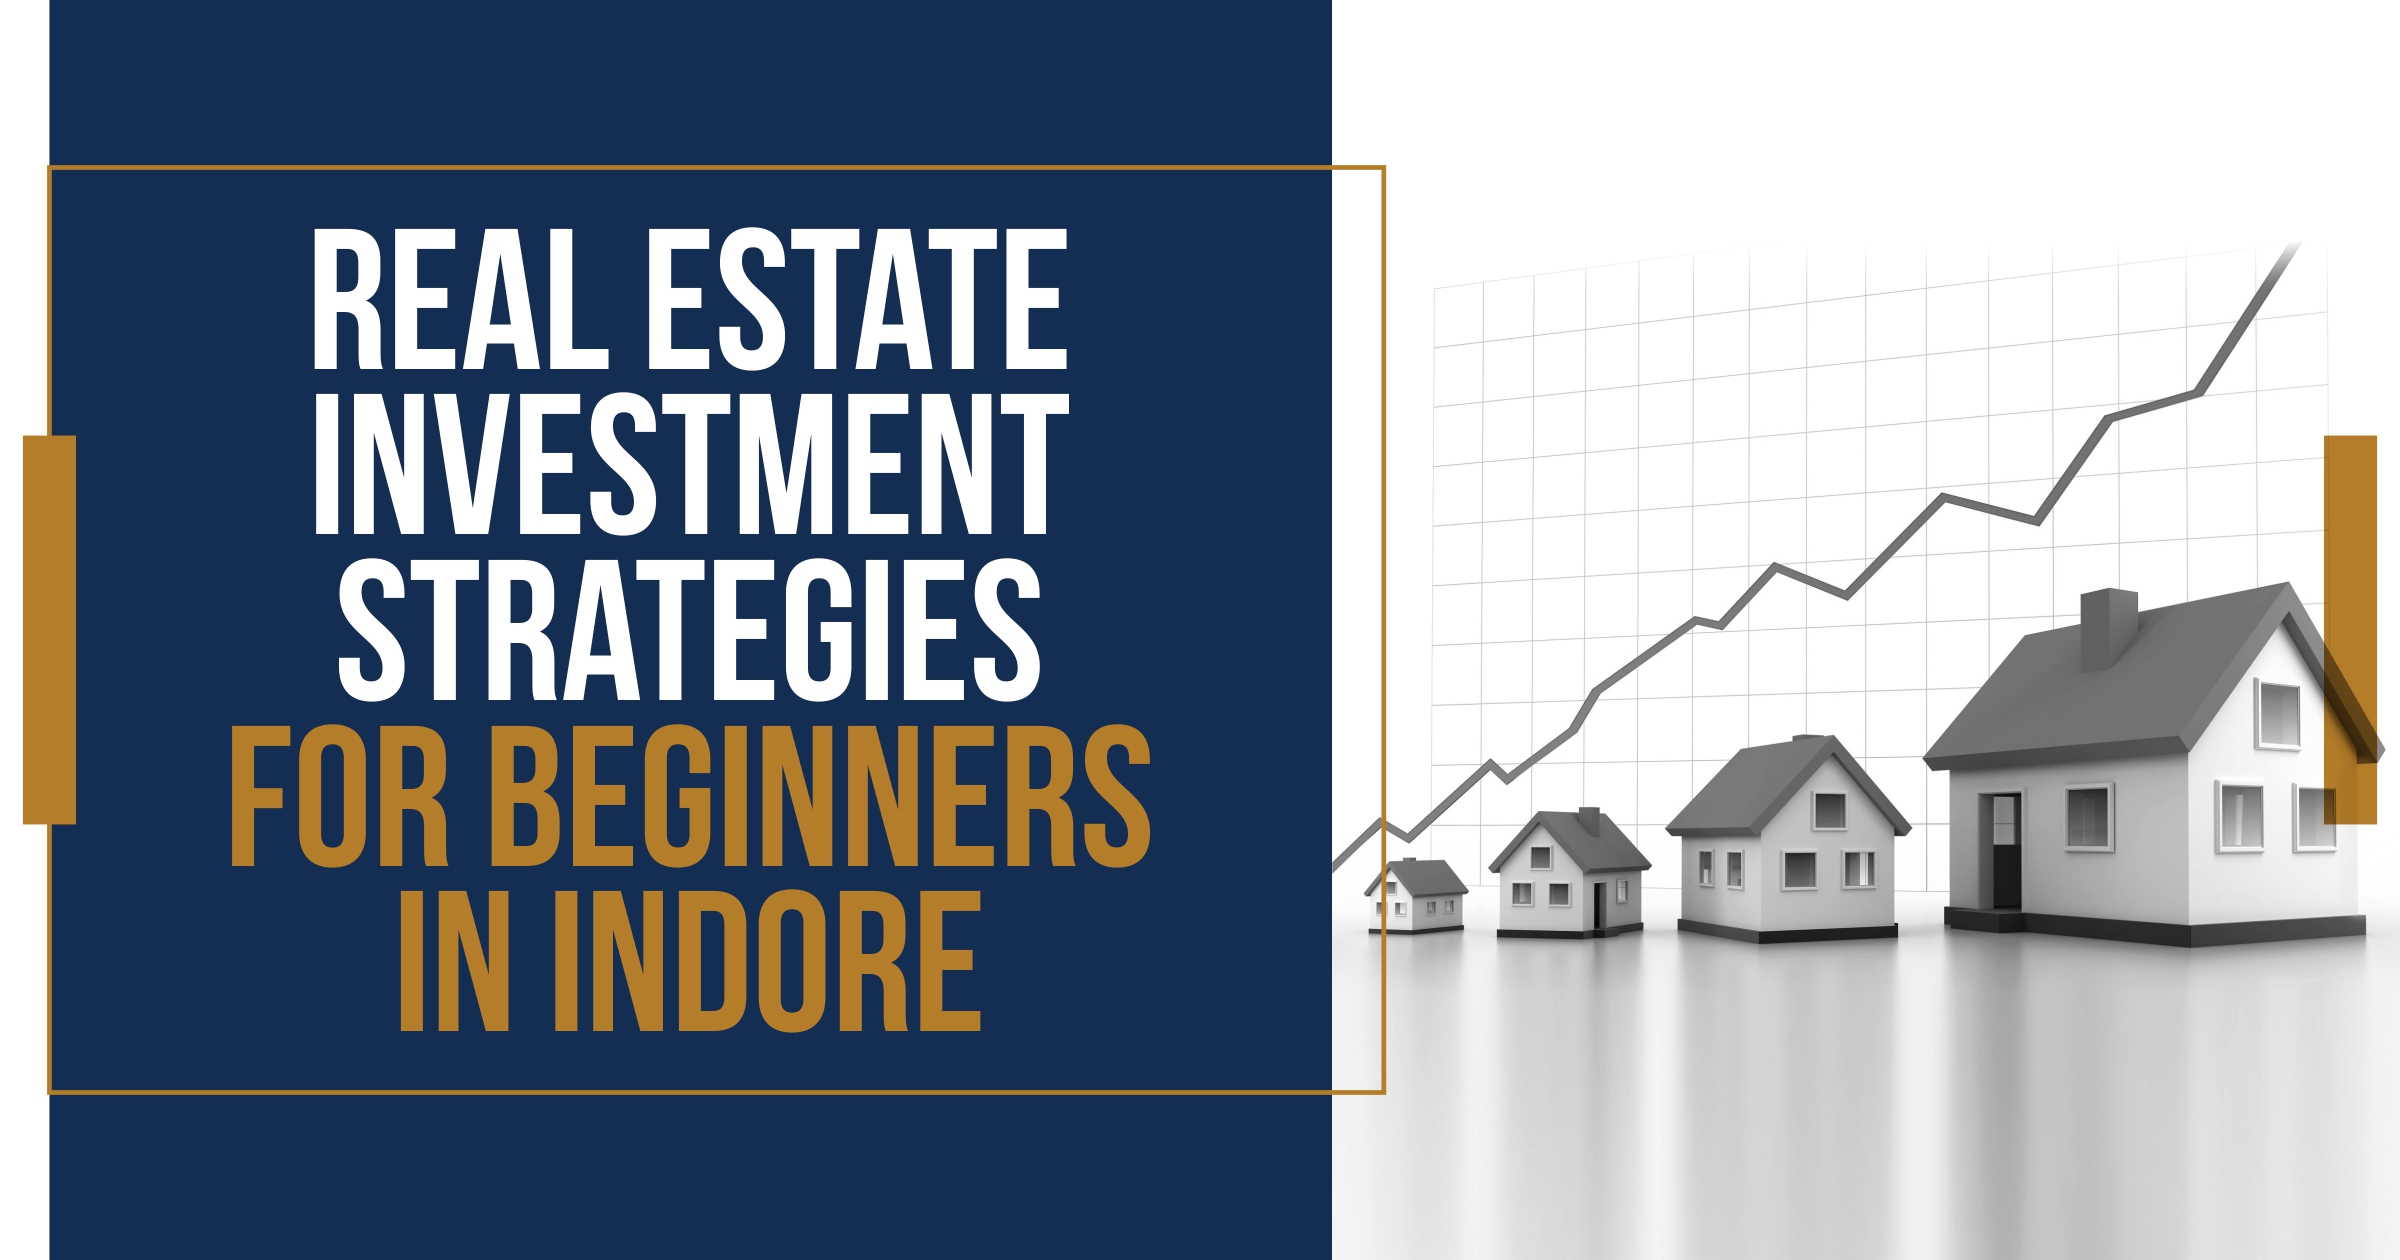 Real Estate Investment Strategies for Beginners in Indore